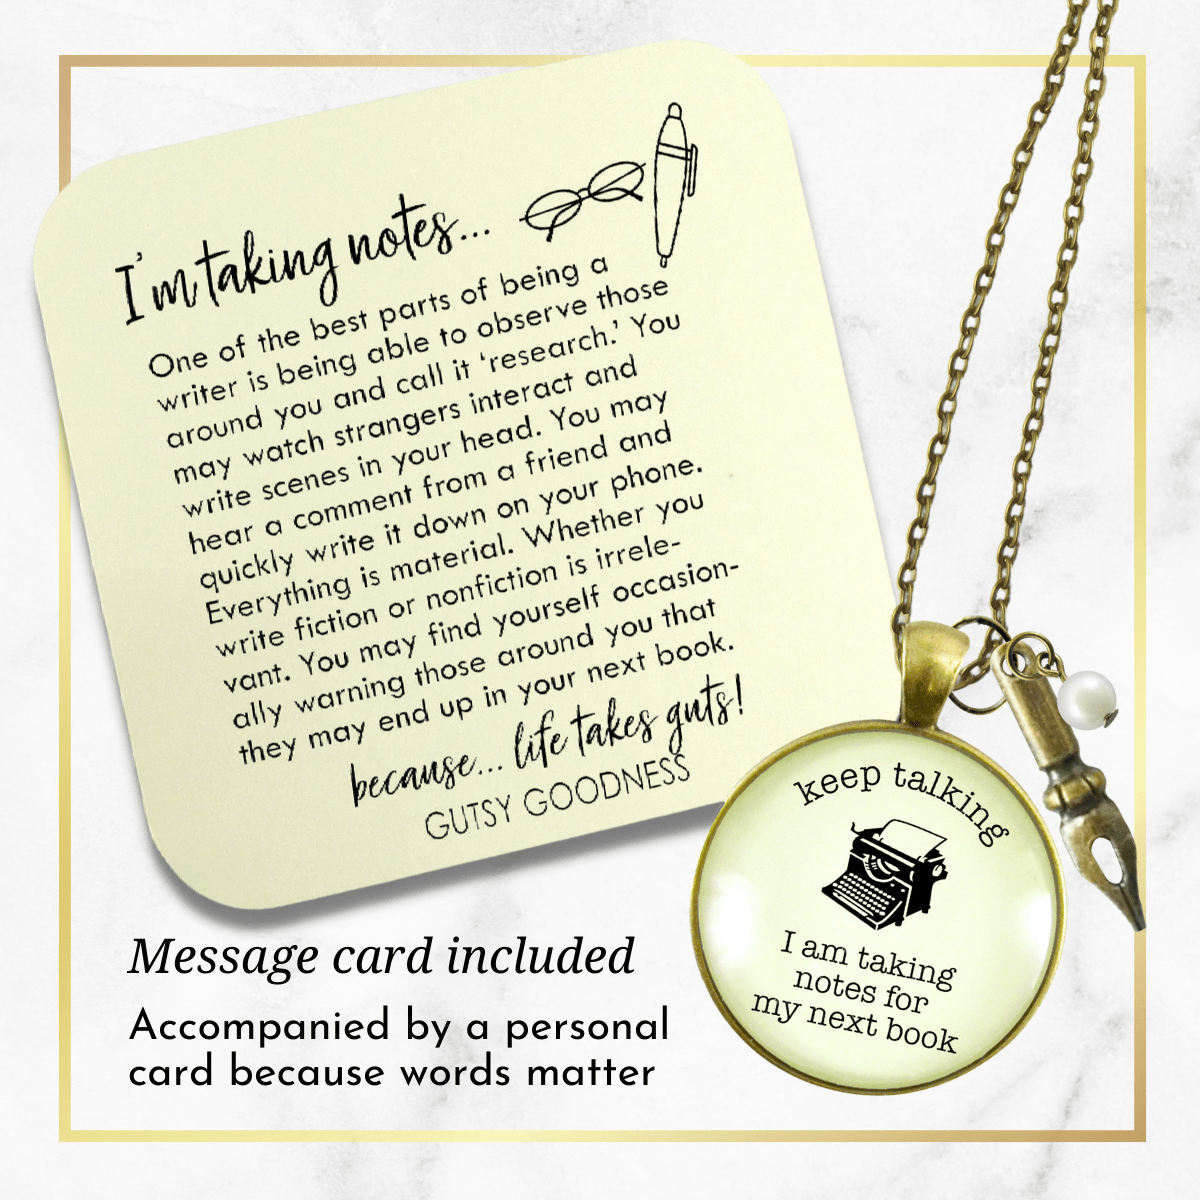 Gutsy Goodness Author Necklace Keep Talking Taking Notes Book Jewelry Writers Quote - Gutsy Goodness;Author Necklace Keep Talking Taking Notes Book Jewelry Writers Quote - Gutsy Goodness Handmade Jewelry Gifts